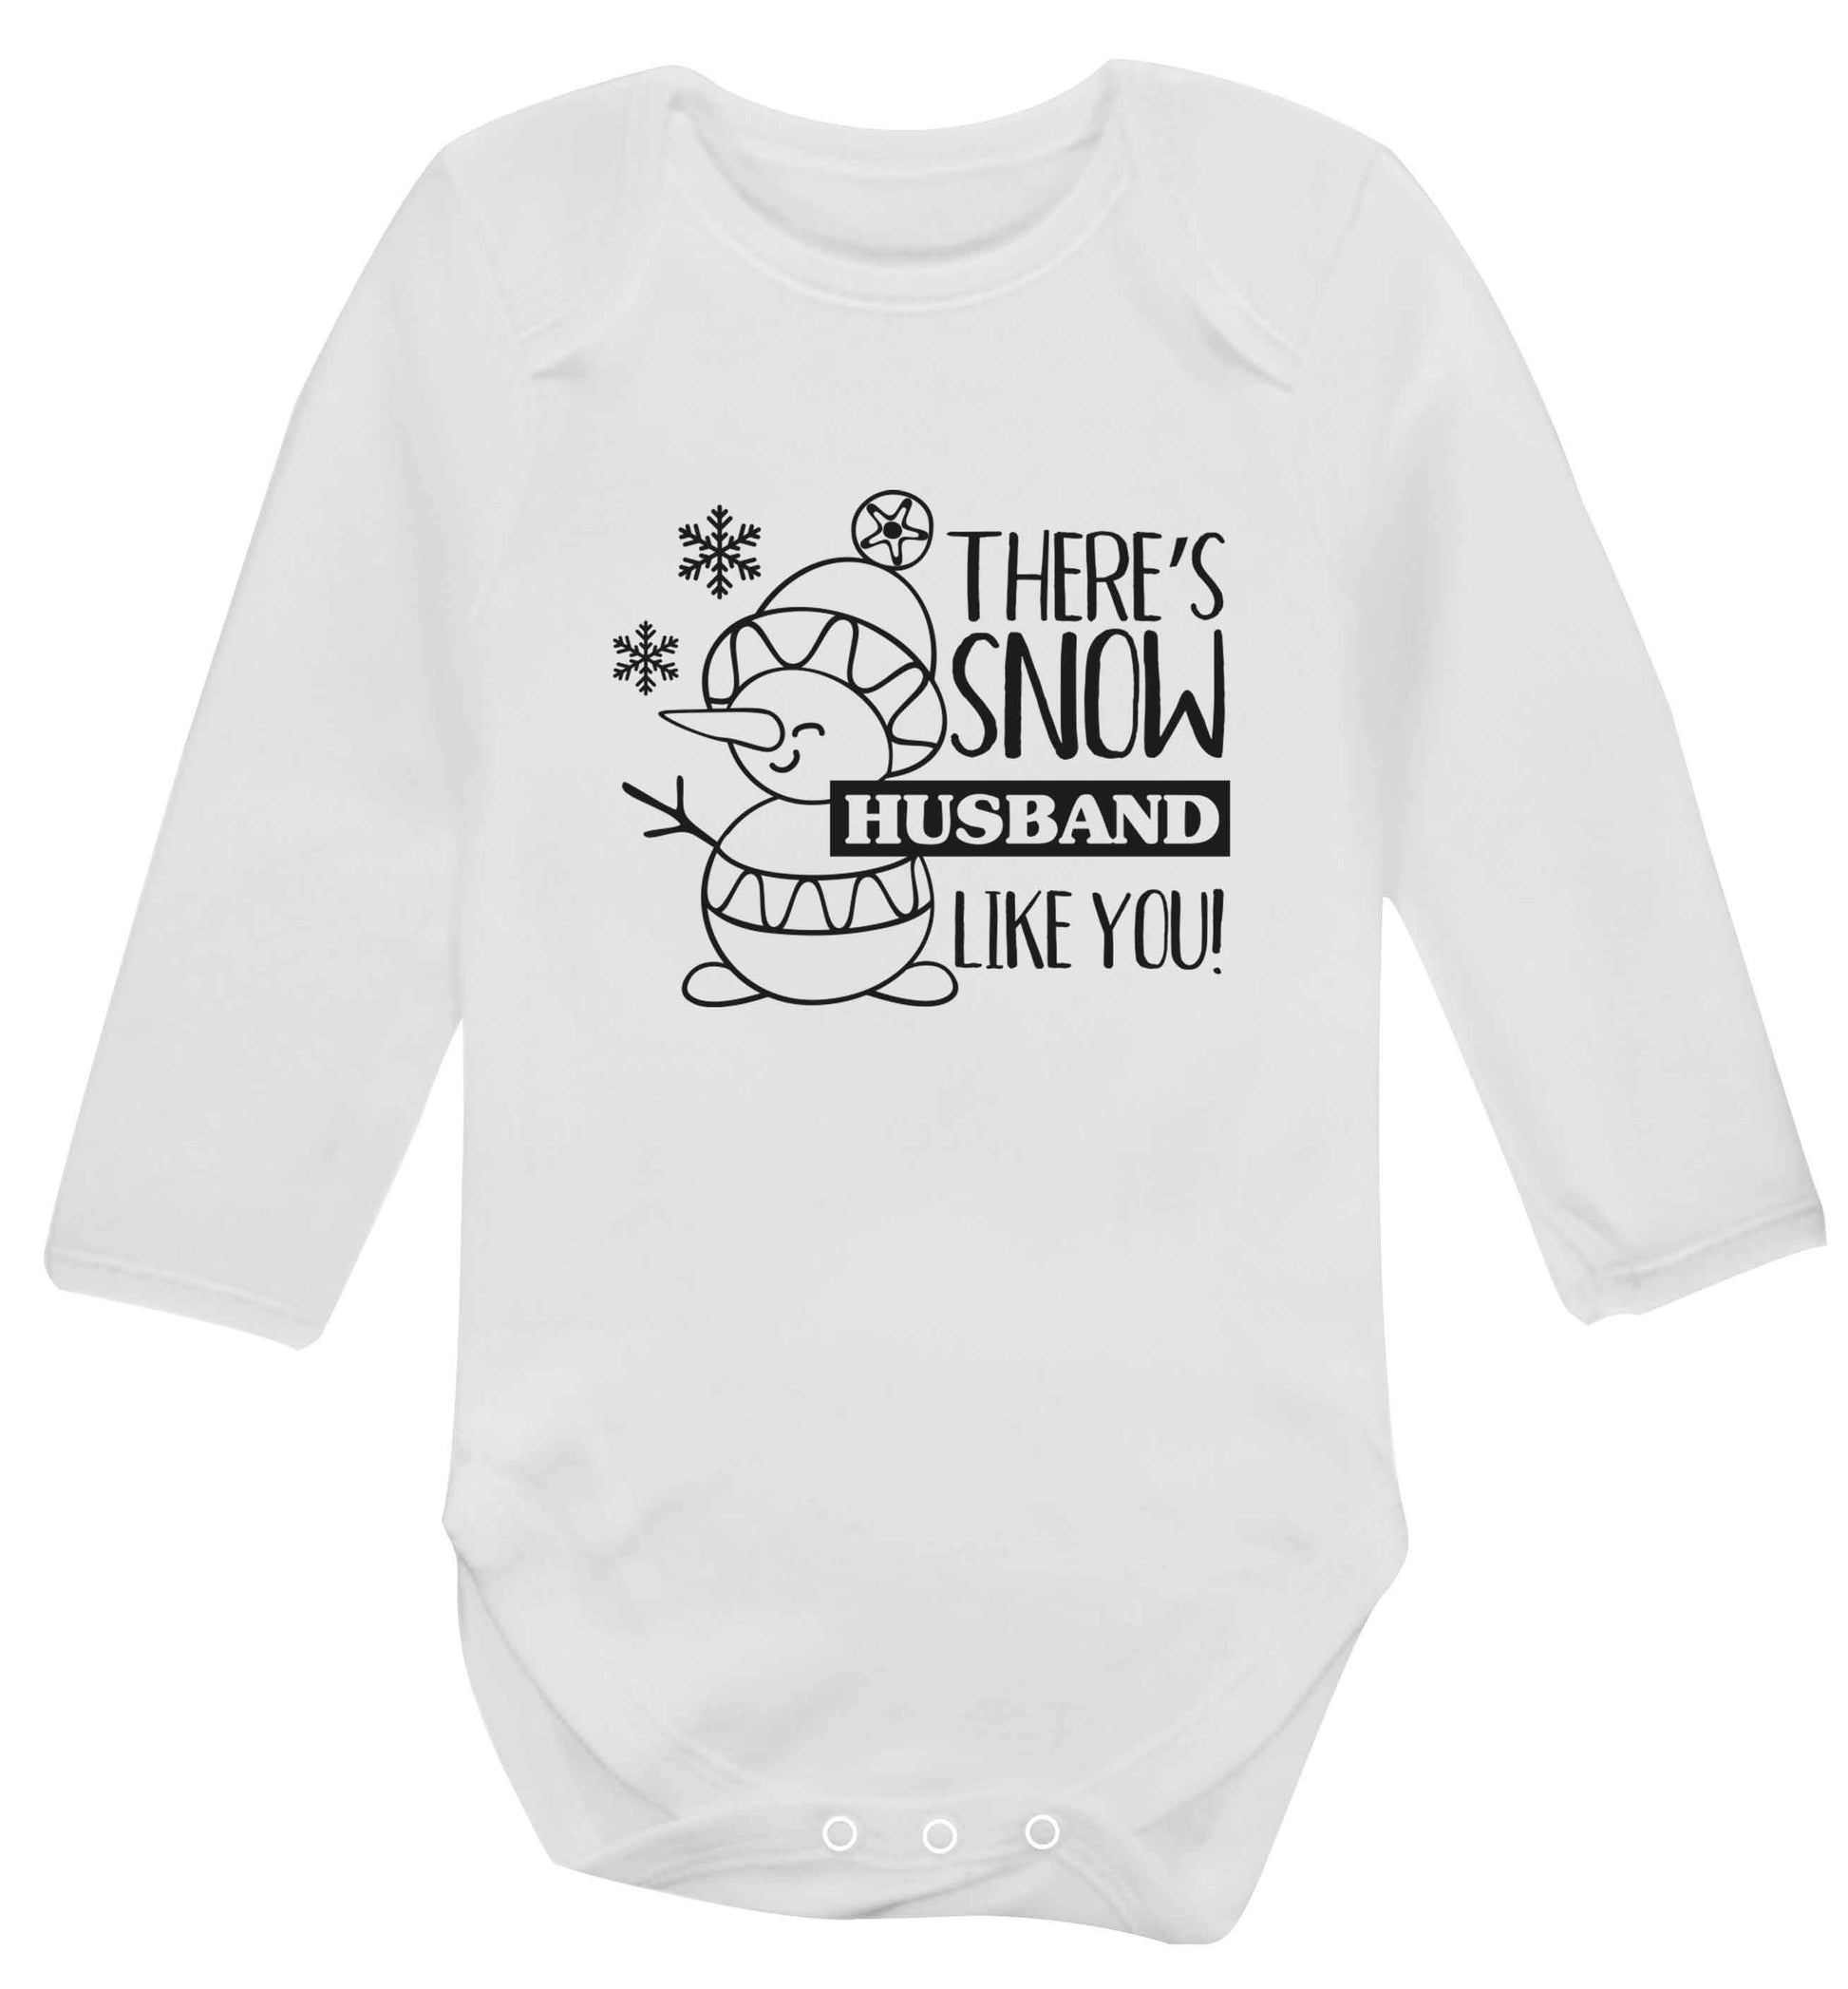 There's snow husband like you baby vest long sleeved white 6-12 months